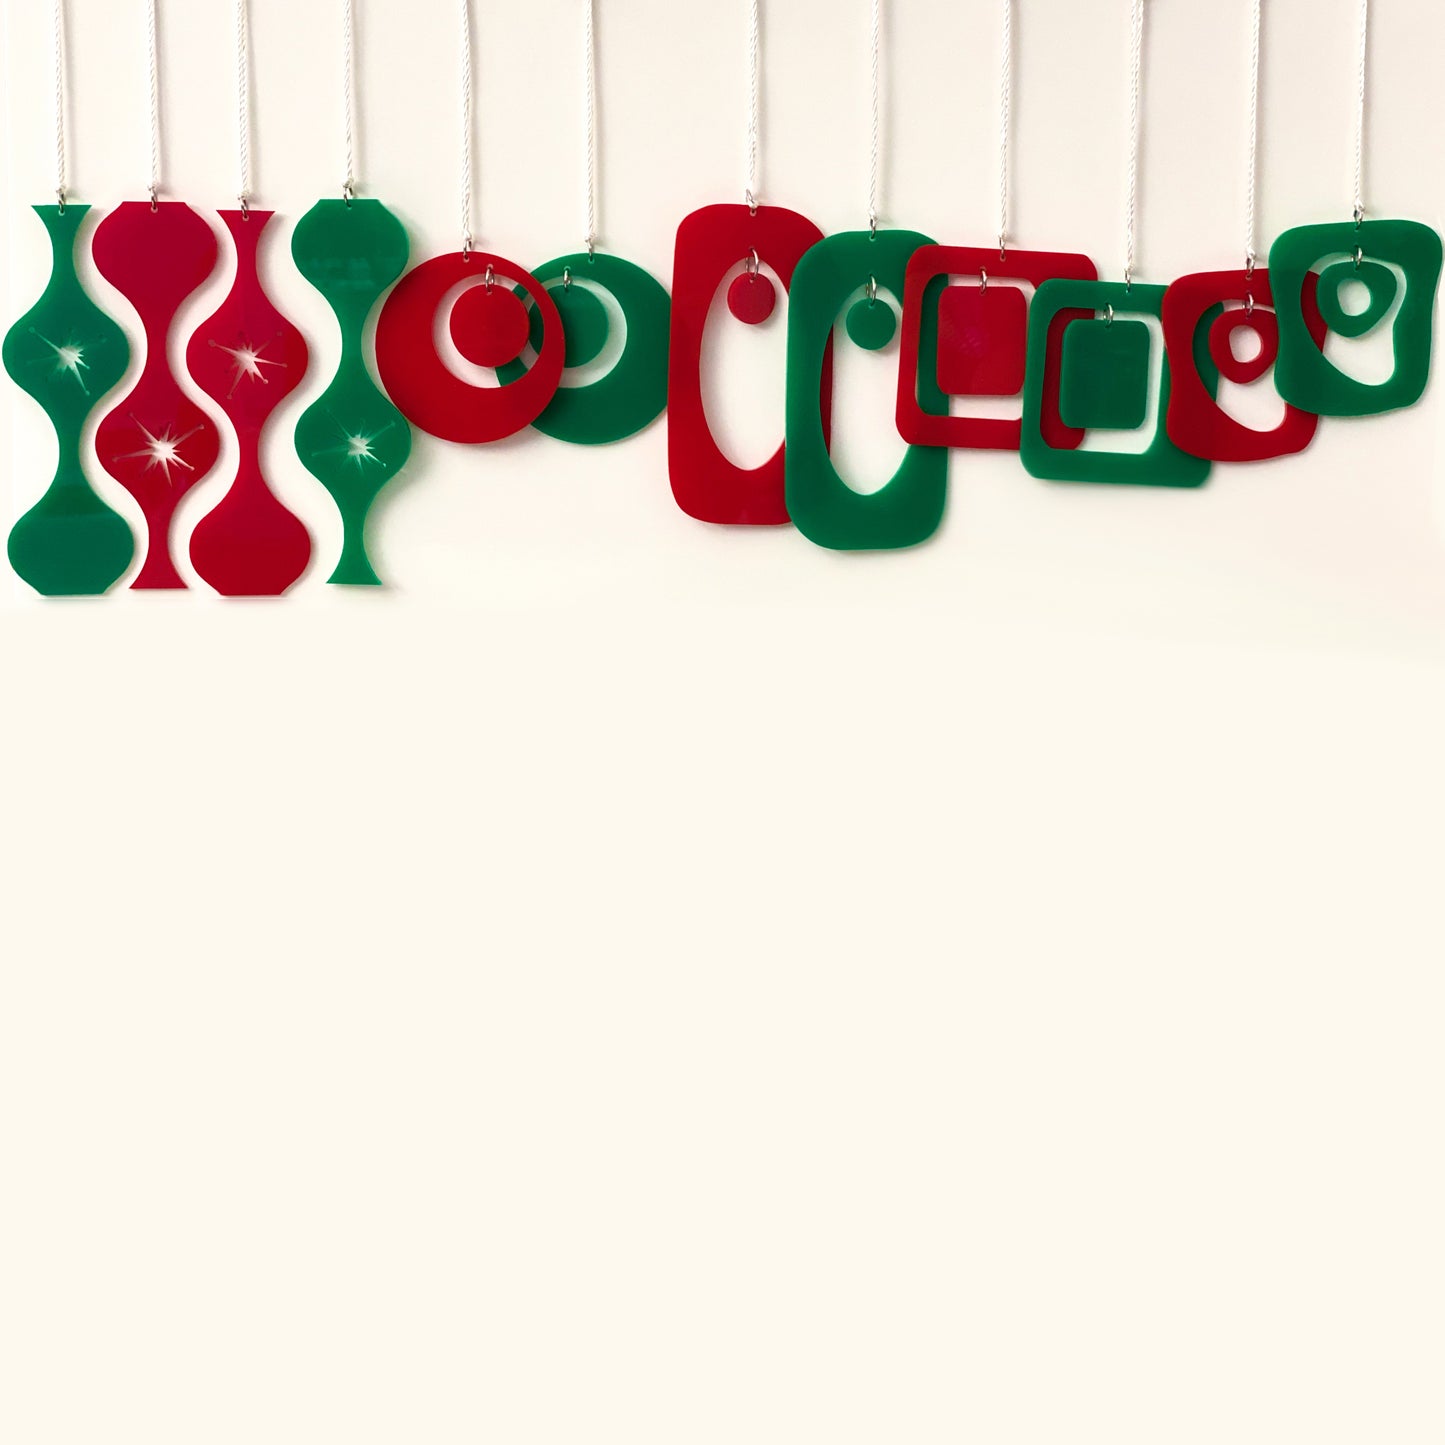 Festive set of 12 mid century modern style Christmas Ornaments in red and green by AtomicMobiles.com